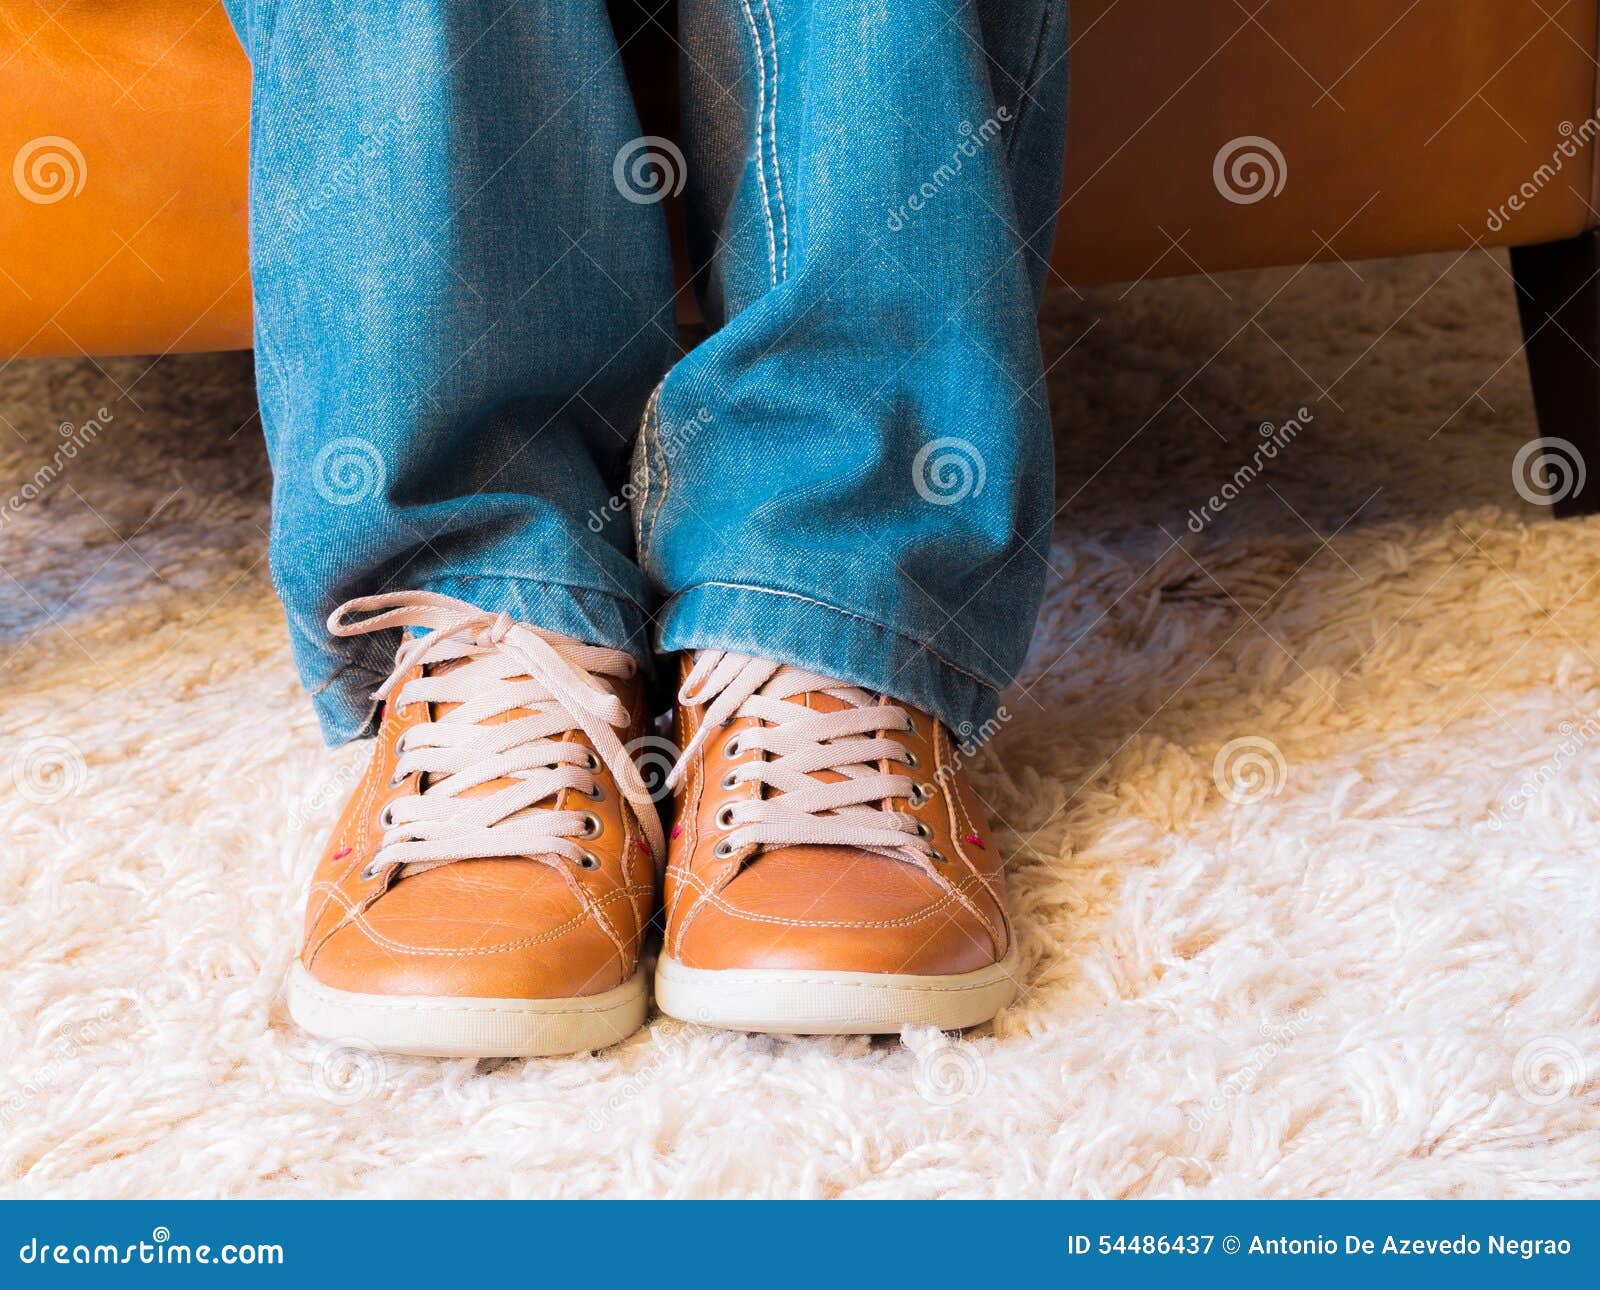 Foot expressions stock image. Image of tense, right, armchair - 54486437